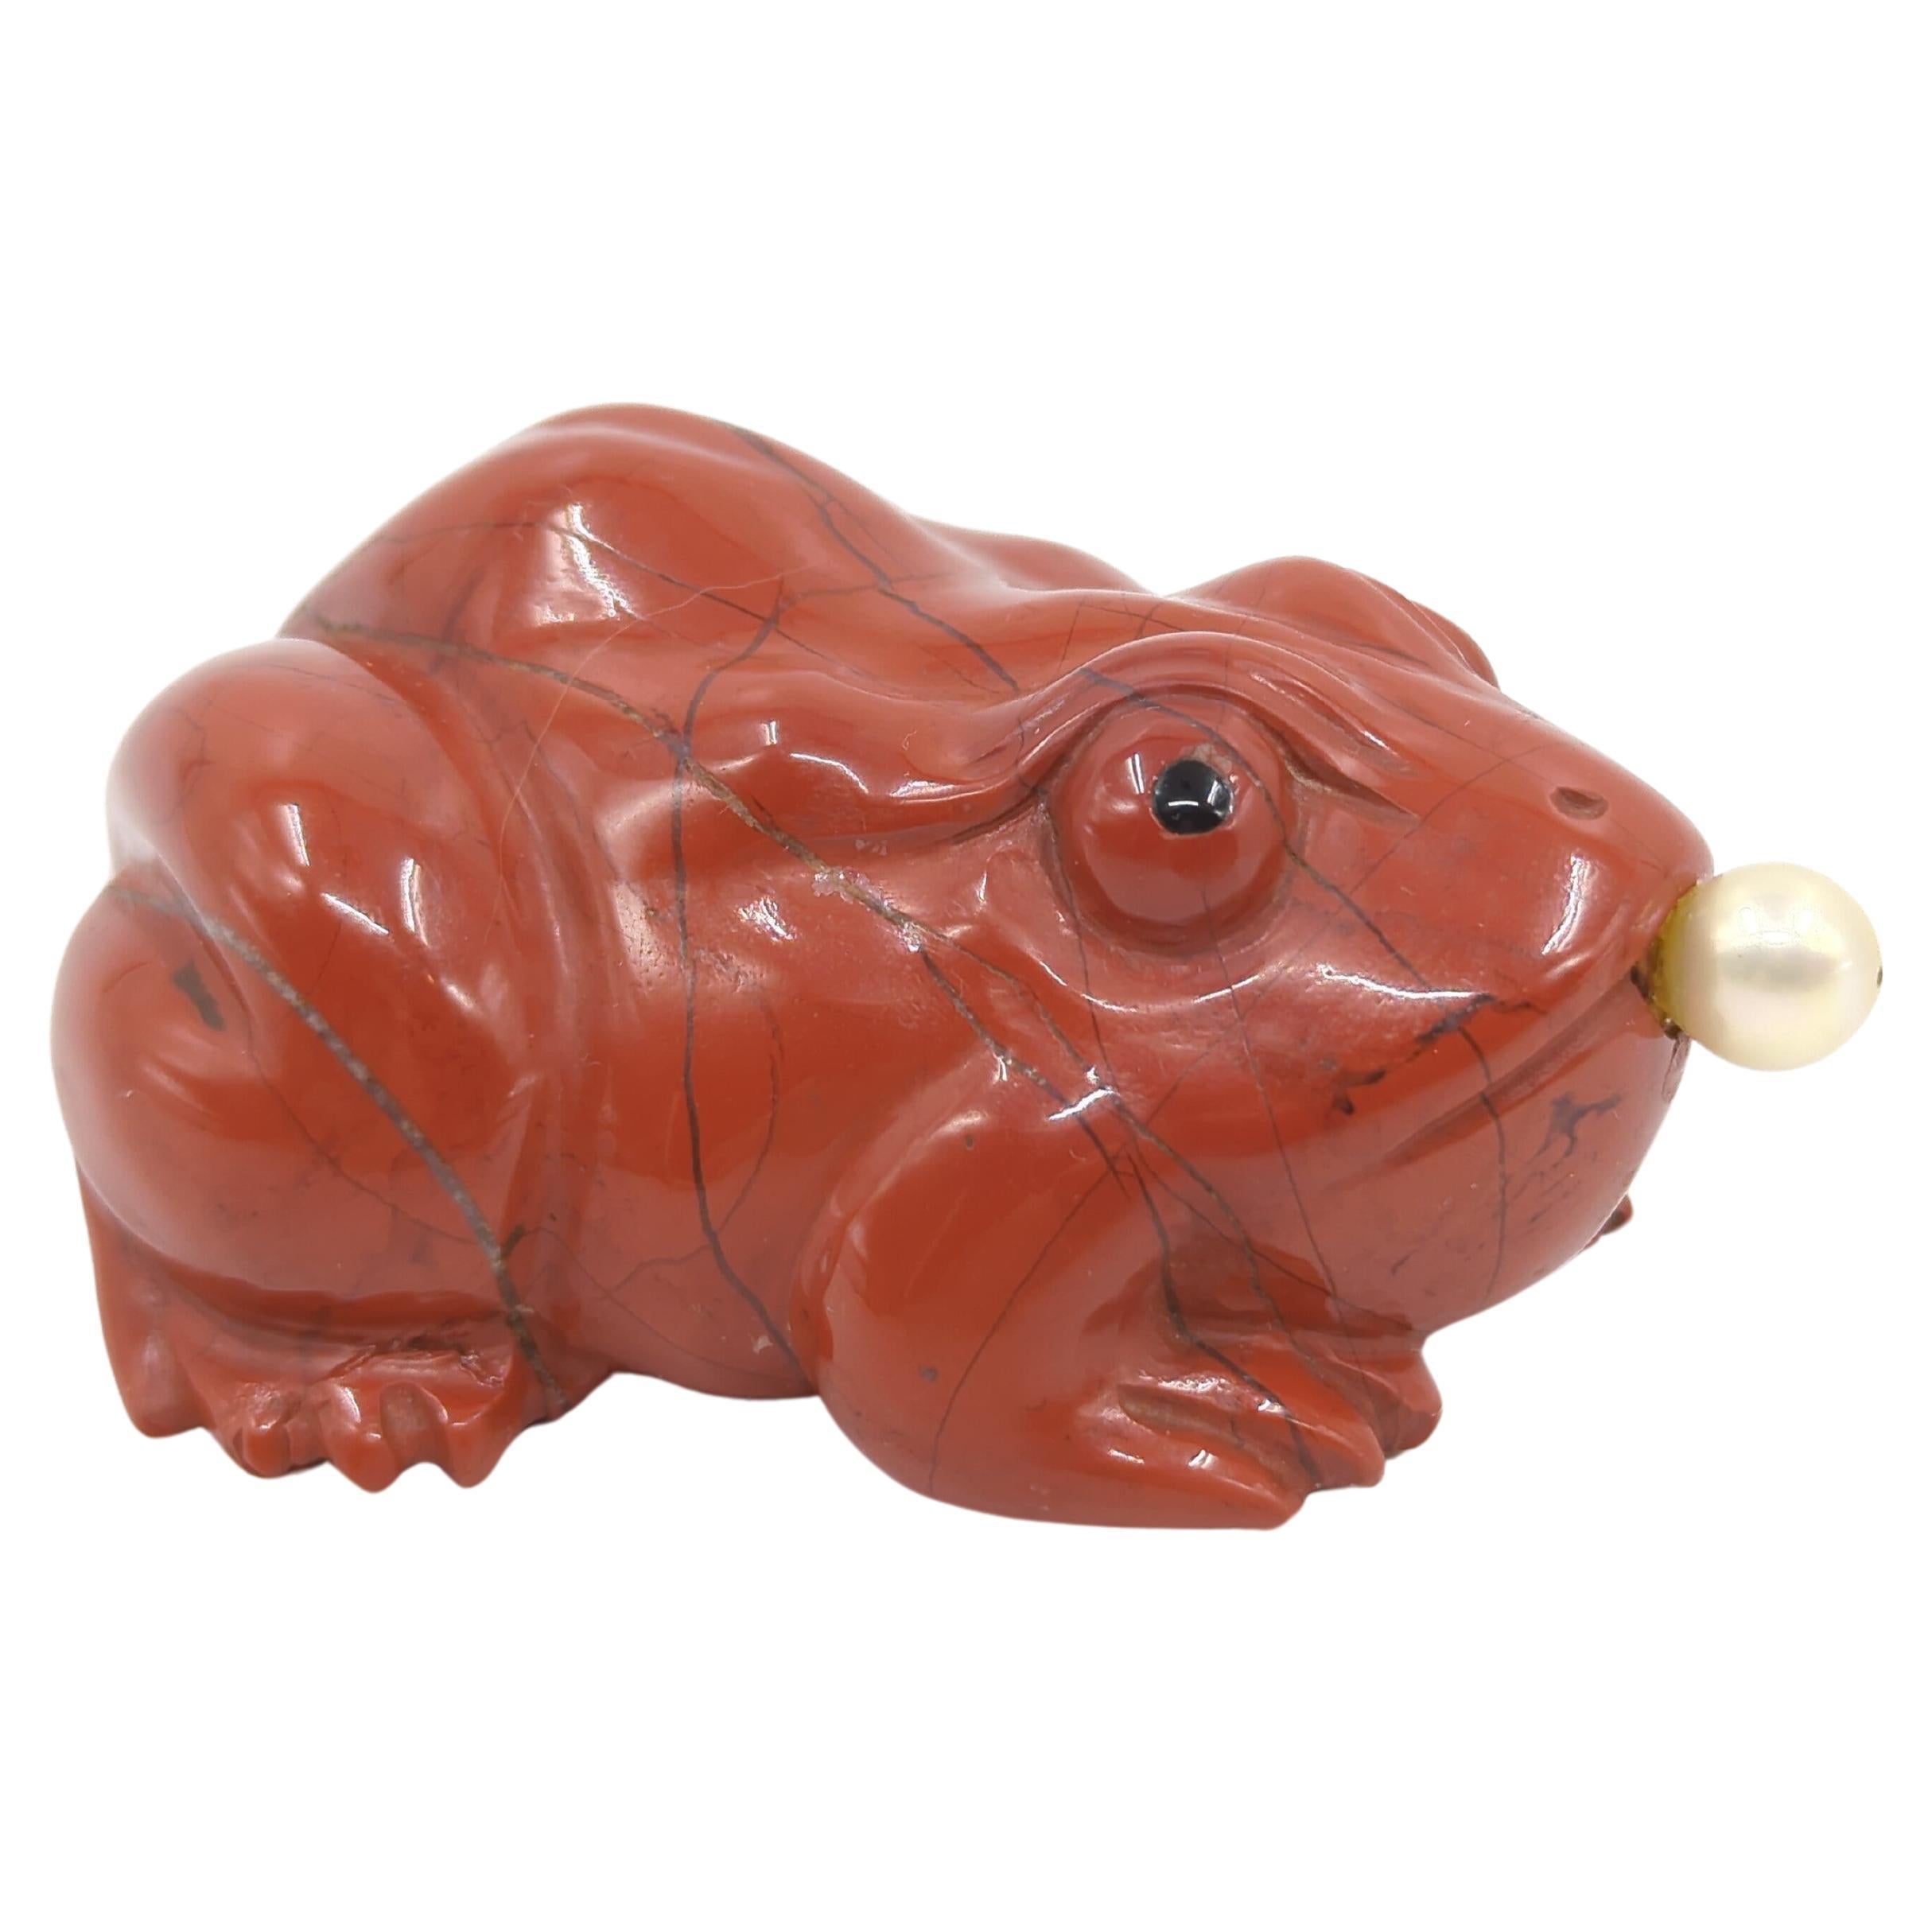 A large antique Chinese hand carved red jasper snuff bottle, in the form of a sitting frog, life like in size and details, eyes painted black, with a pearl stopper to its mouth attached to a pointy metal spoon

circa: 1900-1930
Weight: 196 grams